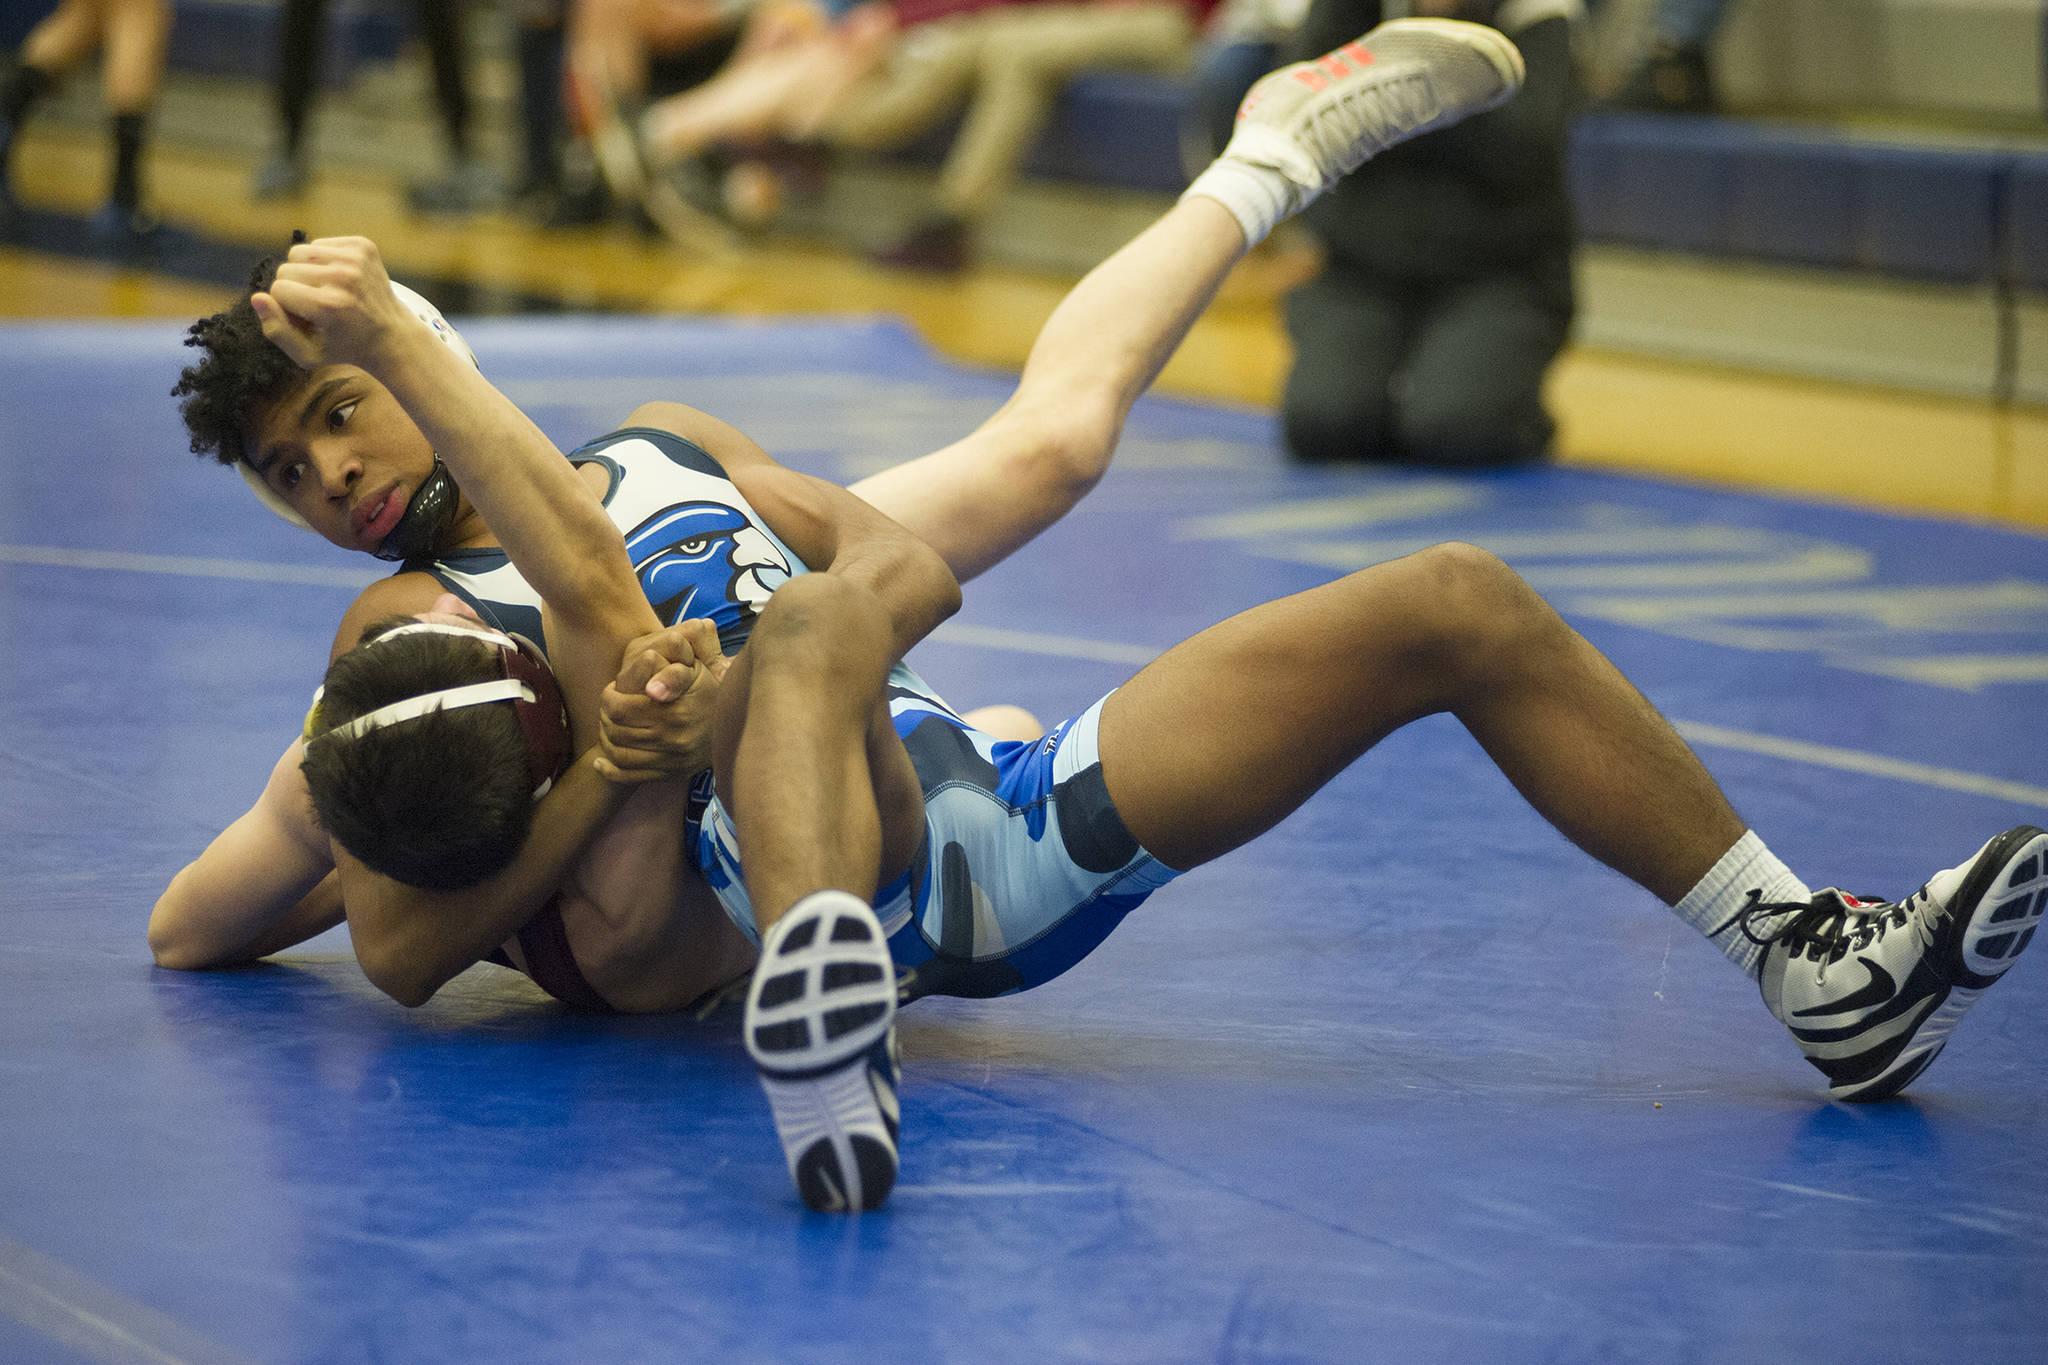 Juneau-Douglas junior Jahrease Mays looks over at the official as he pins Ketchikan’s Patrick Rauwolf in the 125-pound bracket final of the Brandon Pilot Invitational on Saturday at Thunder Mountain High School. Mays won by pin at 1:10. (Nolin Ainsworth | Juneau Empire)